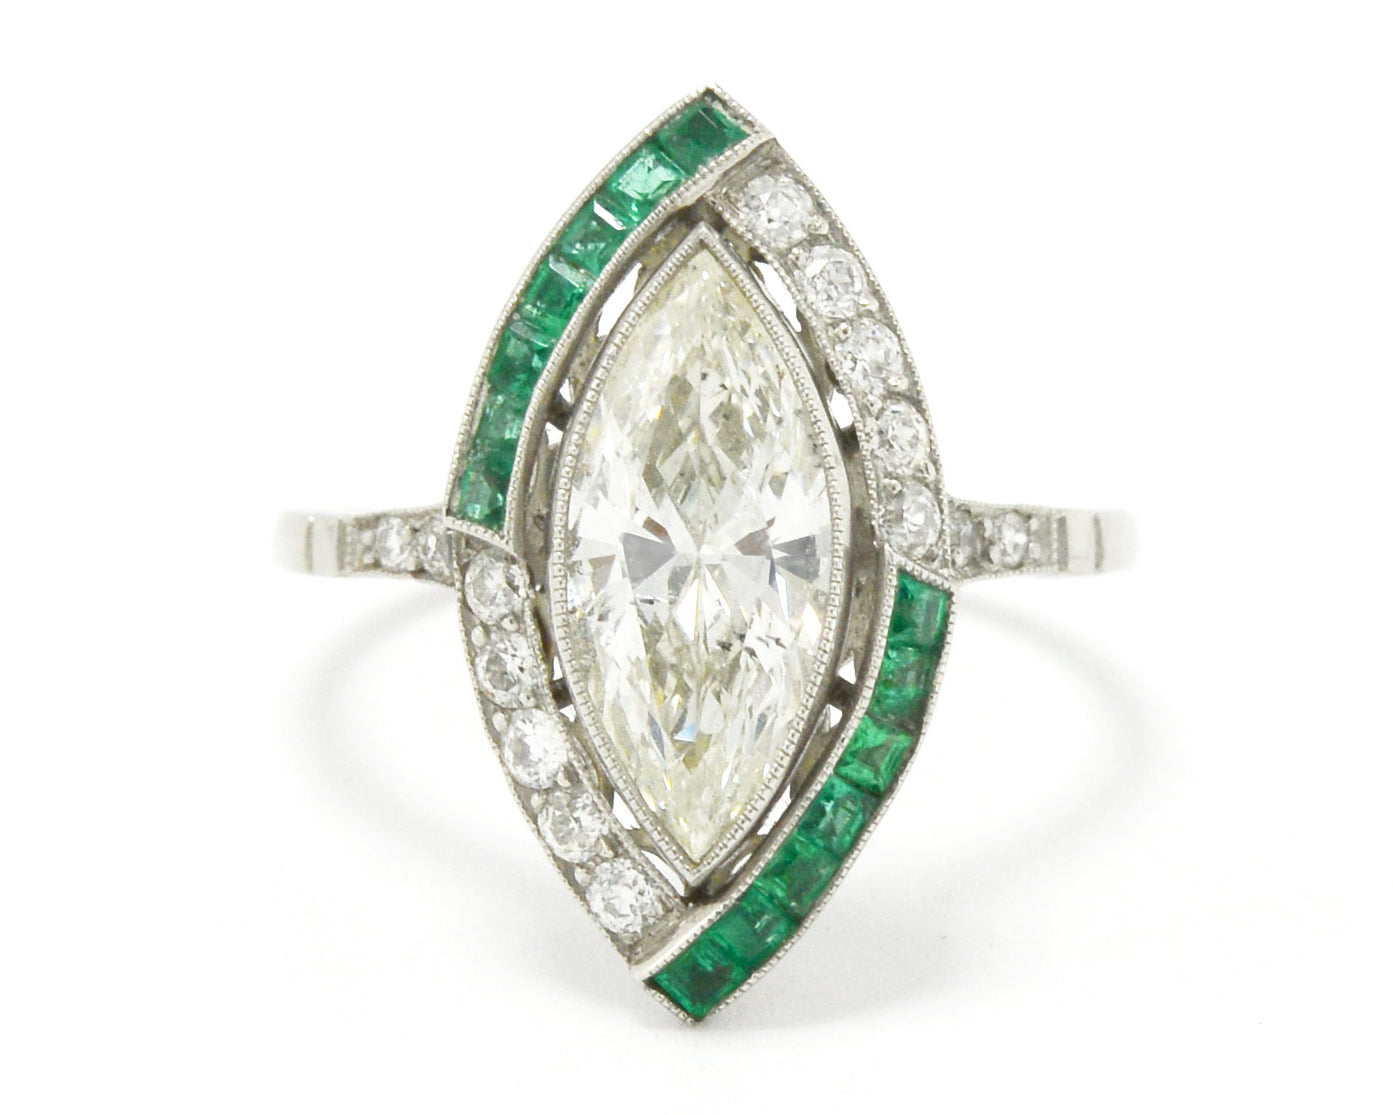 French cut emeralds accent the large marquise cut diamond in this platinum engagement ring.